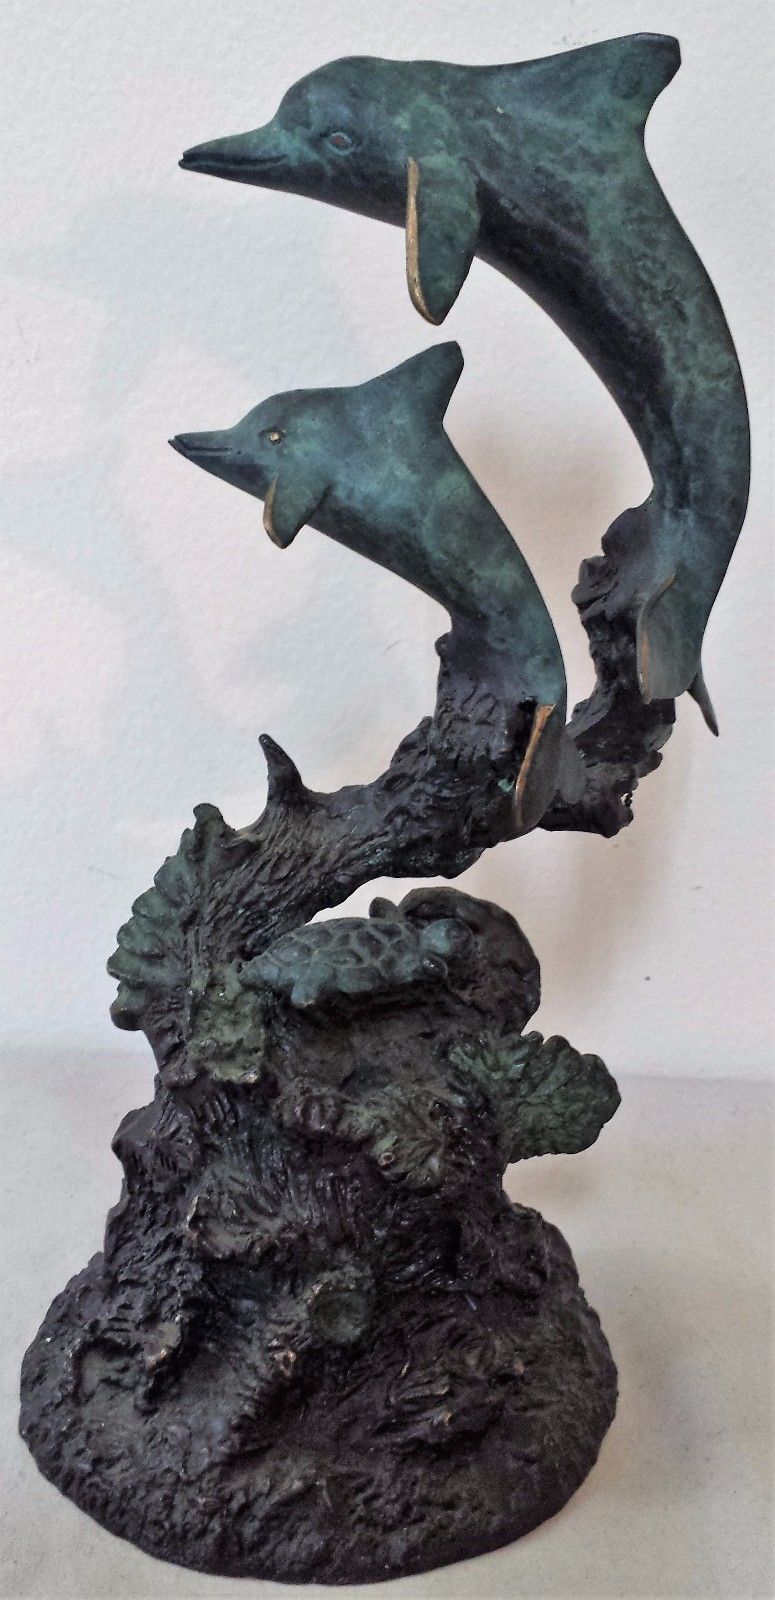 BRONZE STATUE OF DOLPHINS ON REEF BY FAMED NATURALIST ARTIST DAN PARKER-FABULOUS